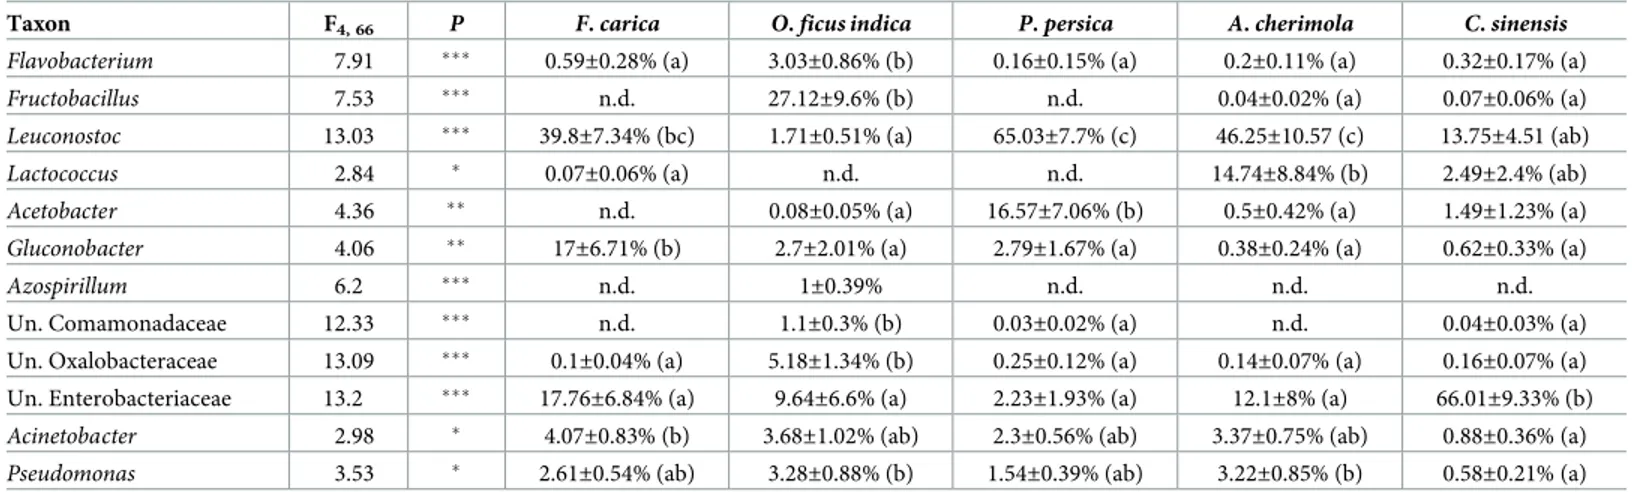 Table 2. Bacterial taxa differentially associated with larvae of C. capitata feeding on different host plants.